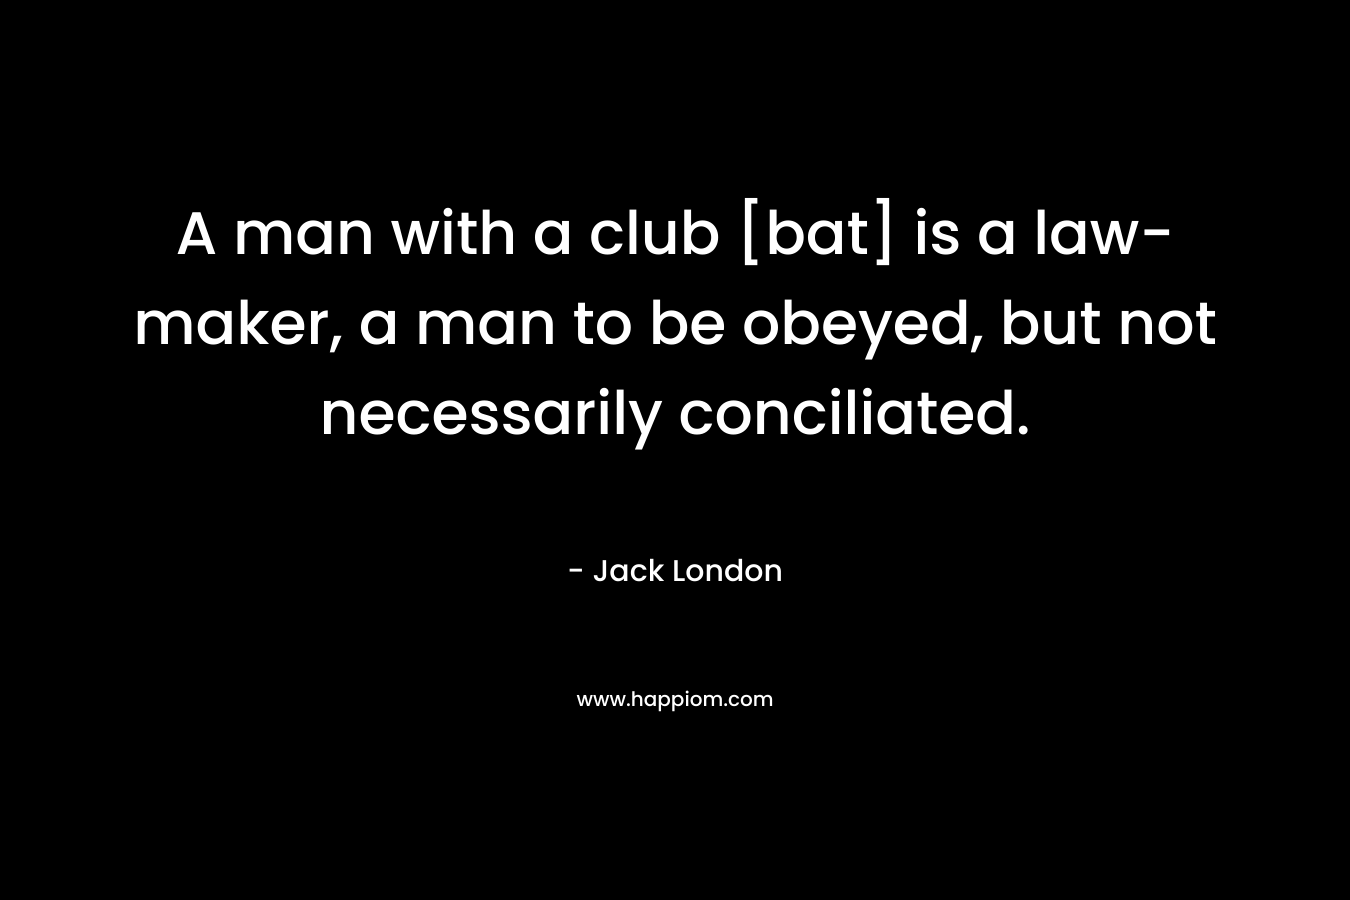 A man with a club [bat] is a law-maker, a man to be obeyed, but not necessarily conciliated. – Jack London